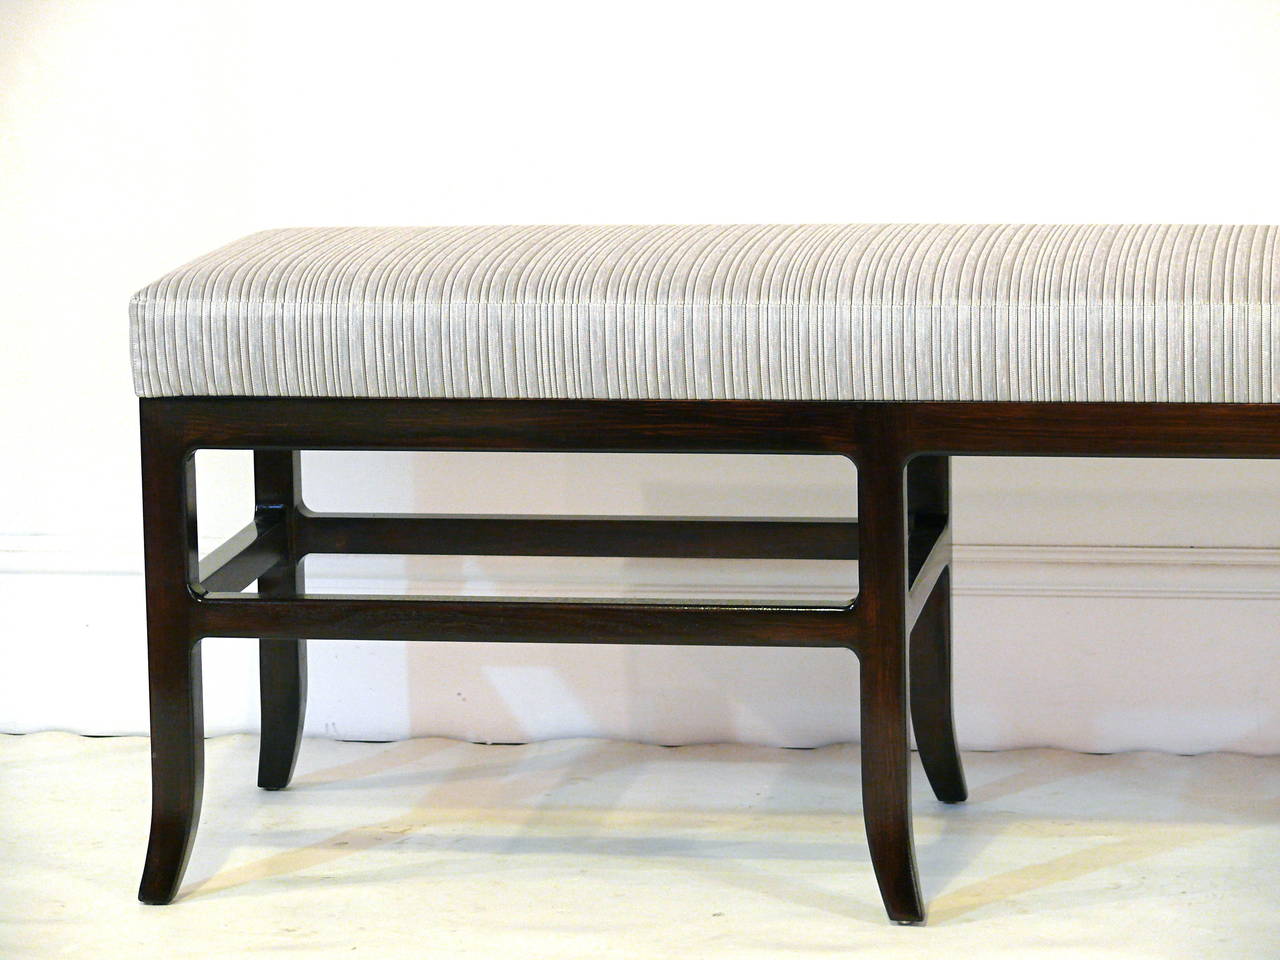 Upholstery Double Pedestal Splayed Leg Bench in the Manner of James Mont